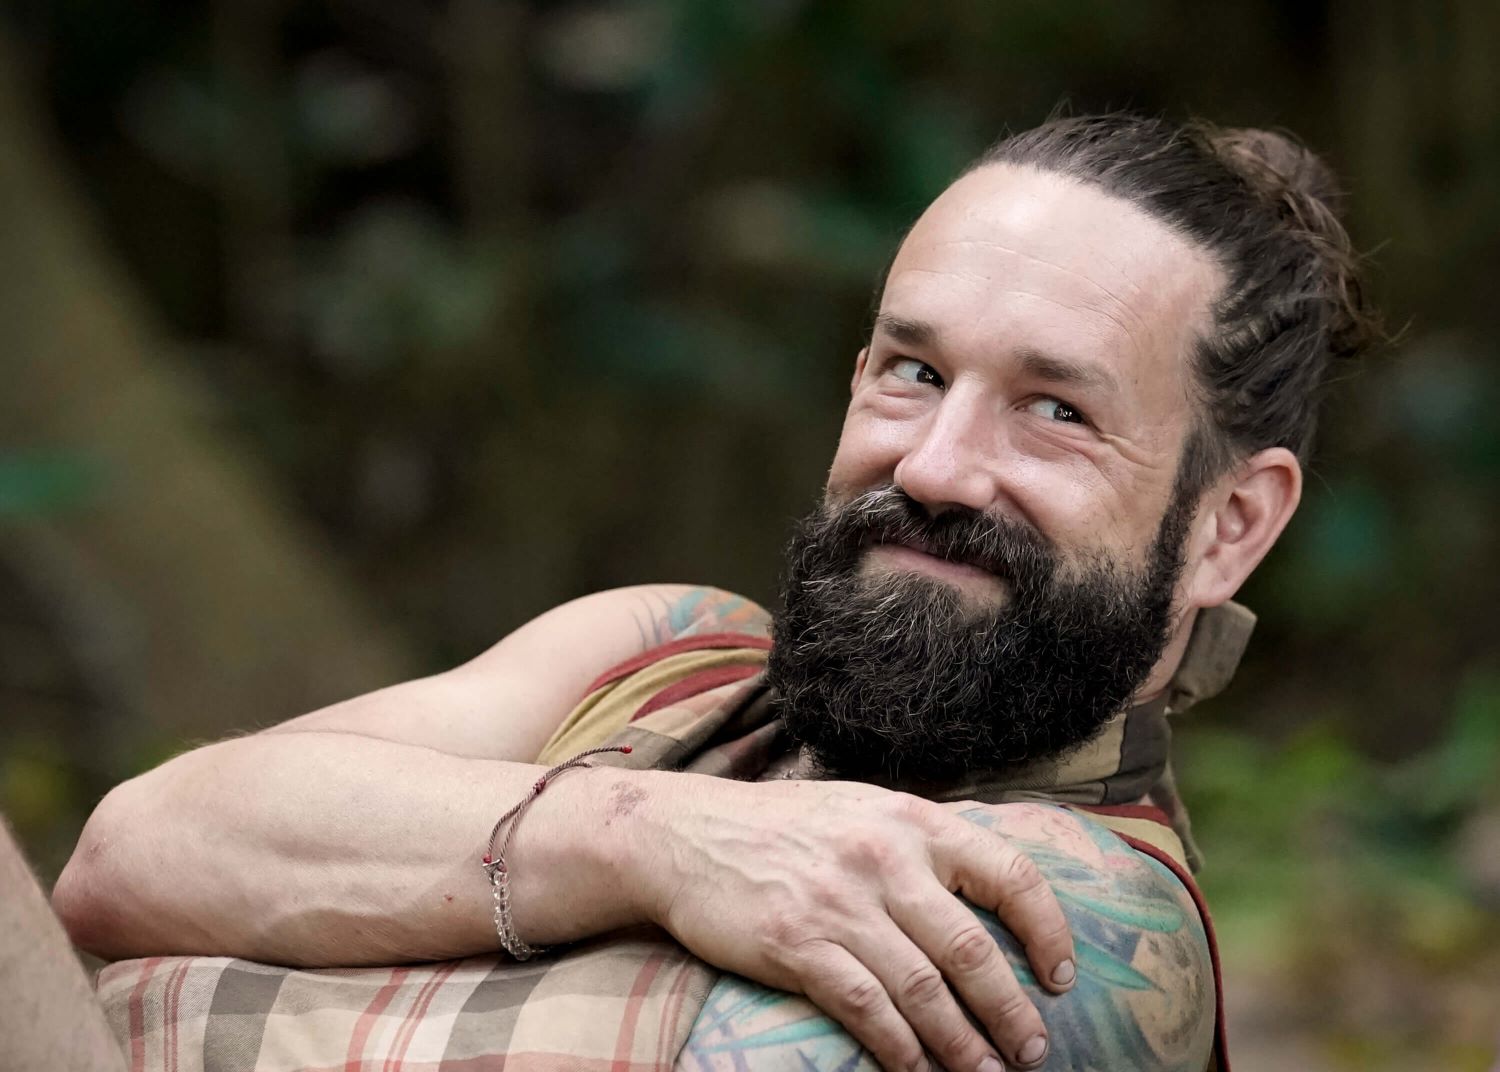 Matthew Grinstead-Mayle, a castaway on 'Survivor 44' on CBS, wears a light orange tank top and a orange and brown plaid sling for his arm.